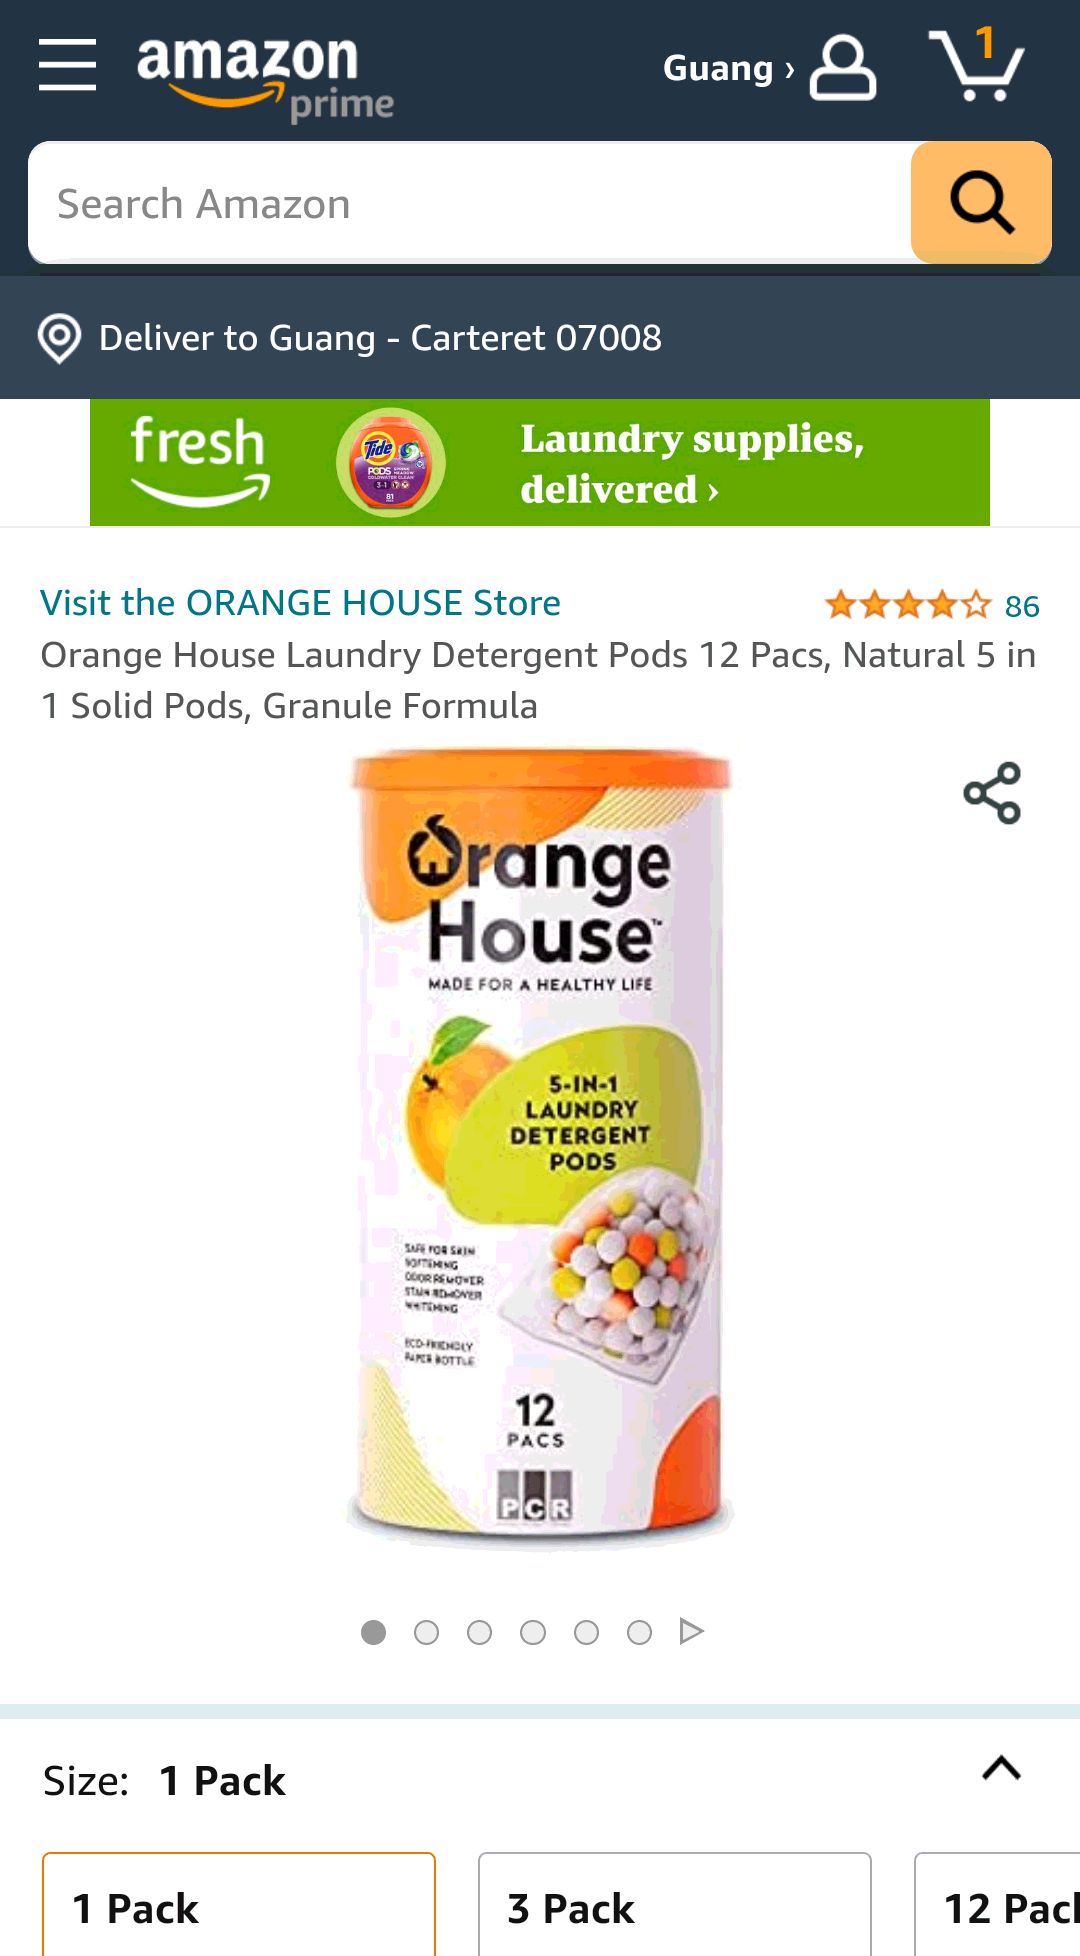 Orange House Laundry Detergent Pods 12 Pacs, Natural 5 in 1 Solid Pods, 5合一洗衣球